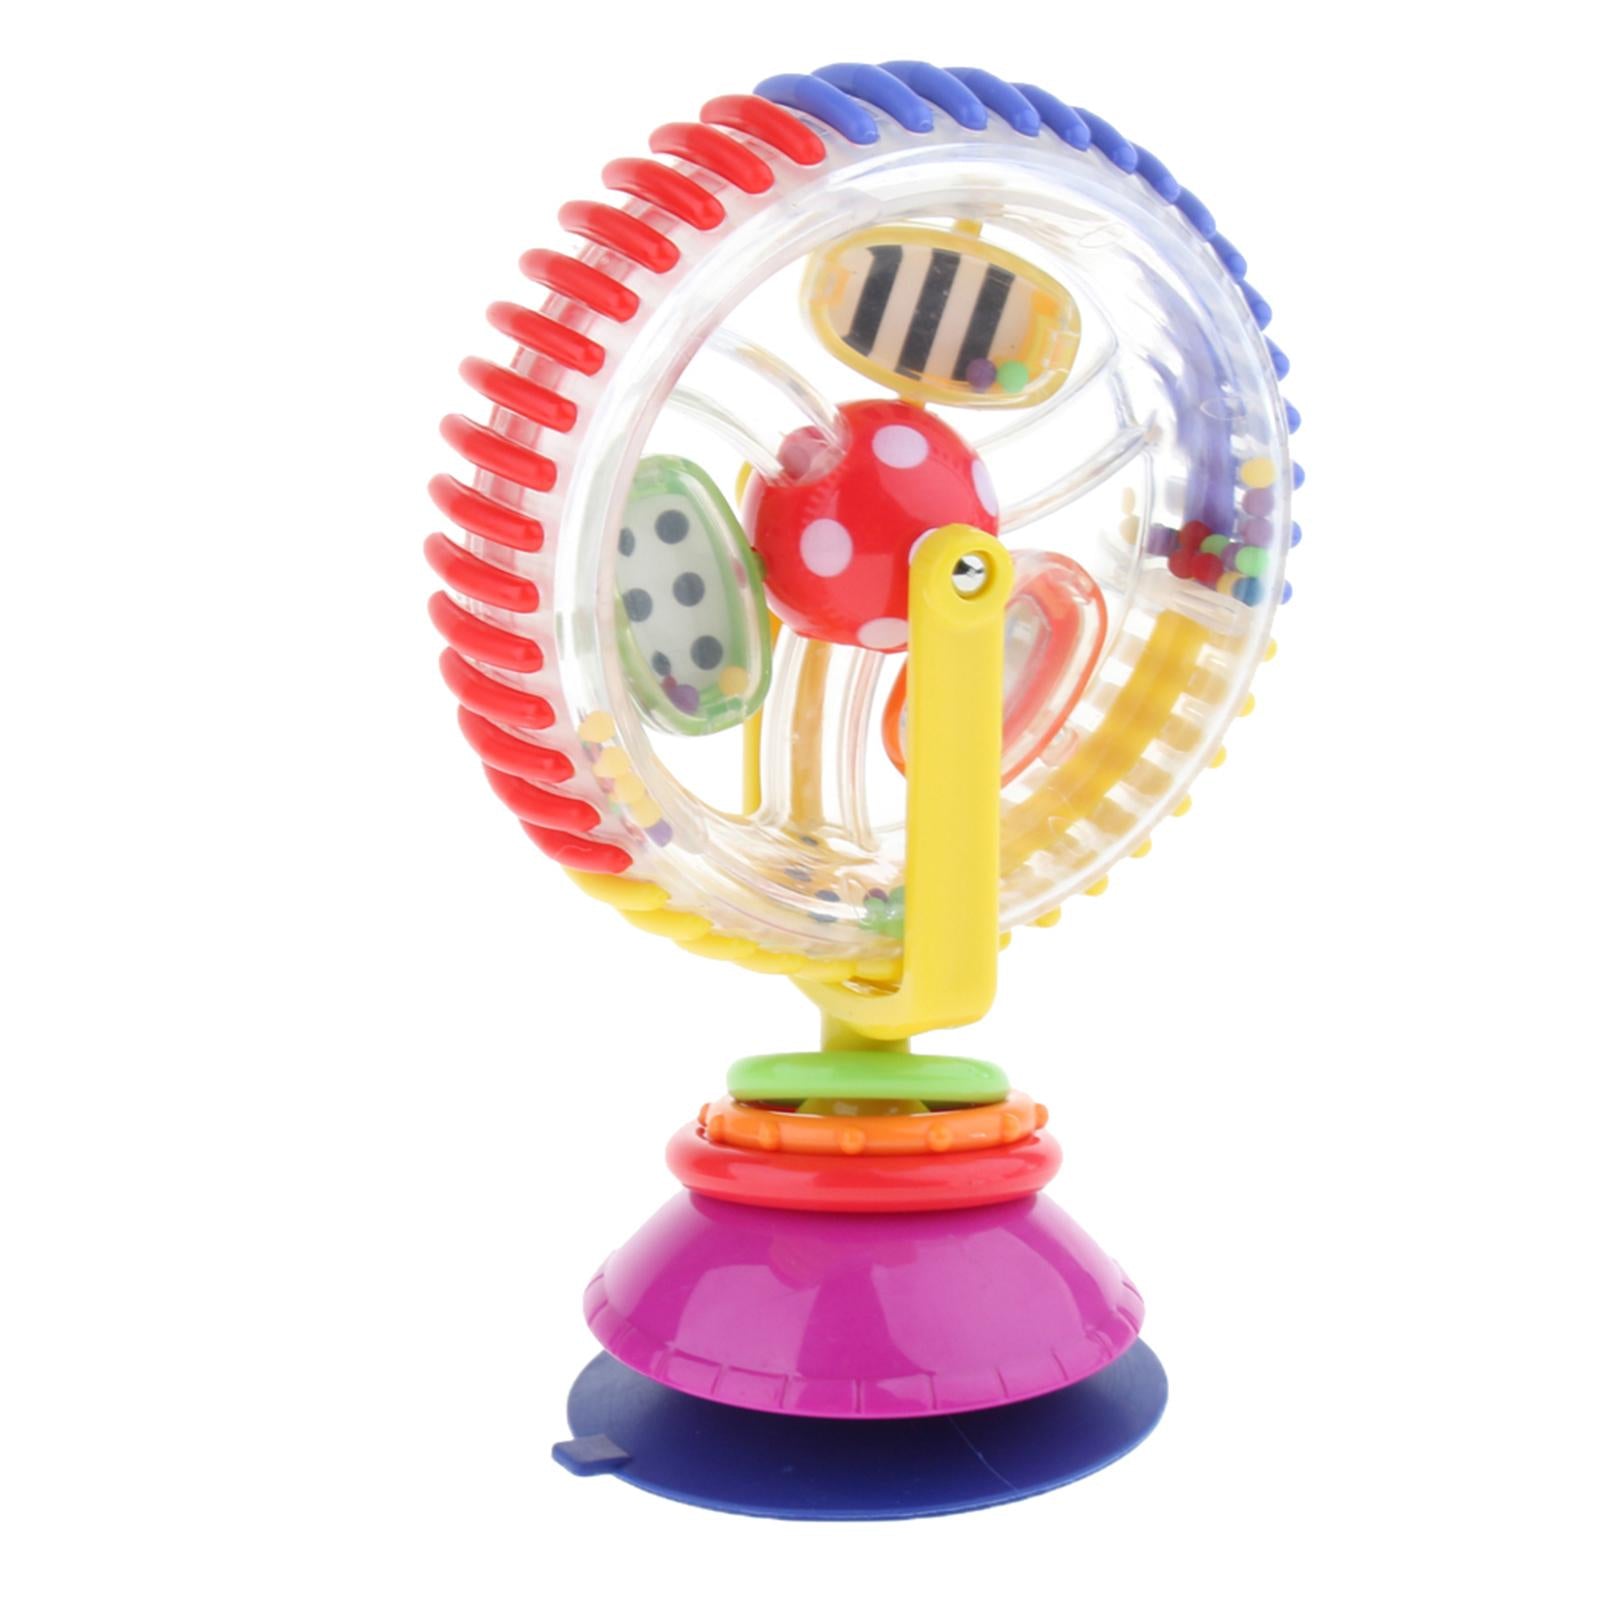 Colorful Rotating Ferris Wheel Toy Activity Center w/ Suction Base, Early Developmental Toy Gift for Baby